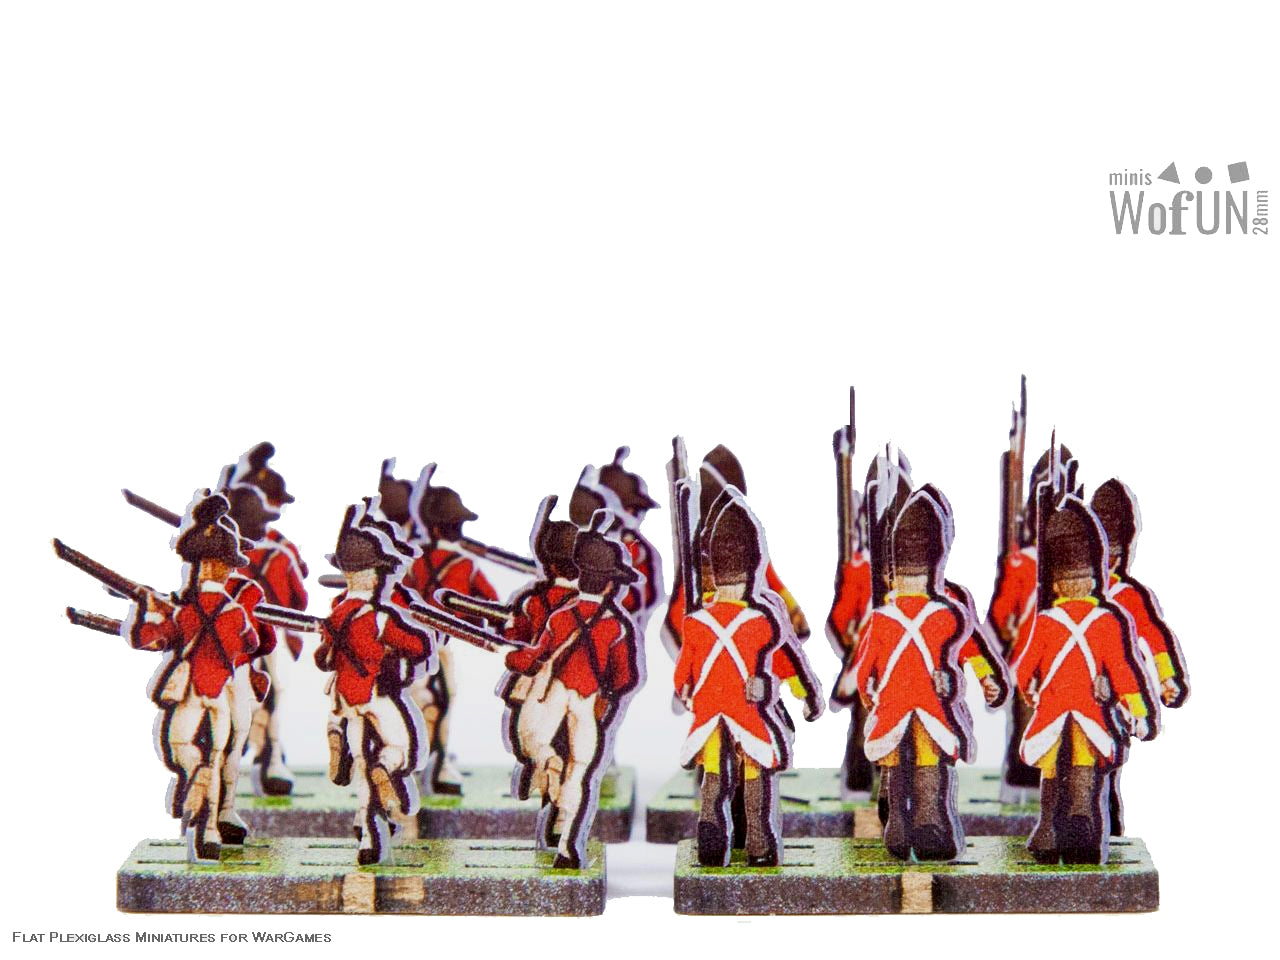 38th Regiment of Foot - Flank